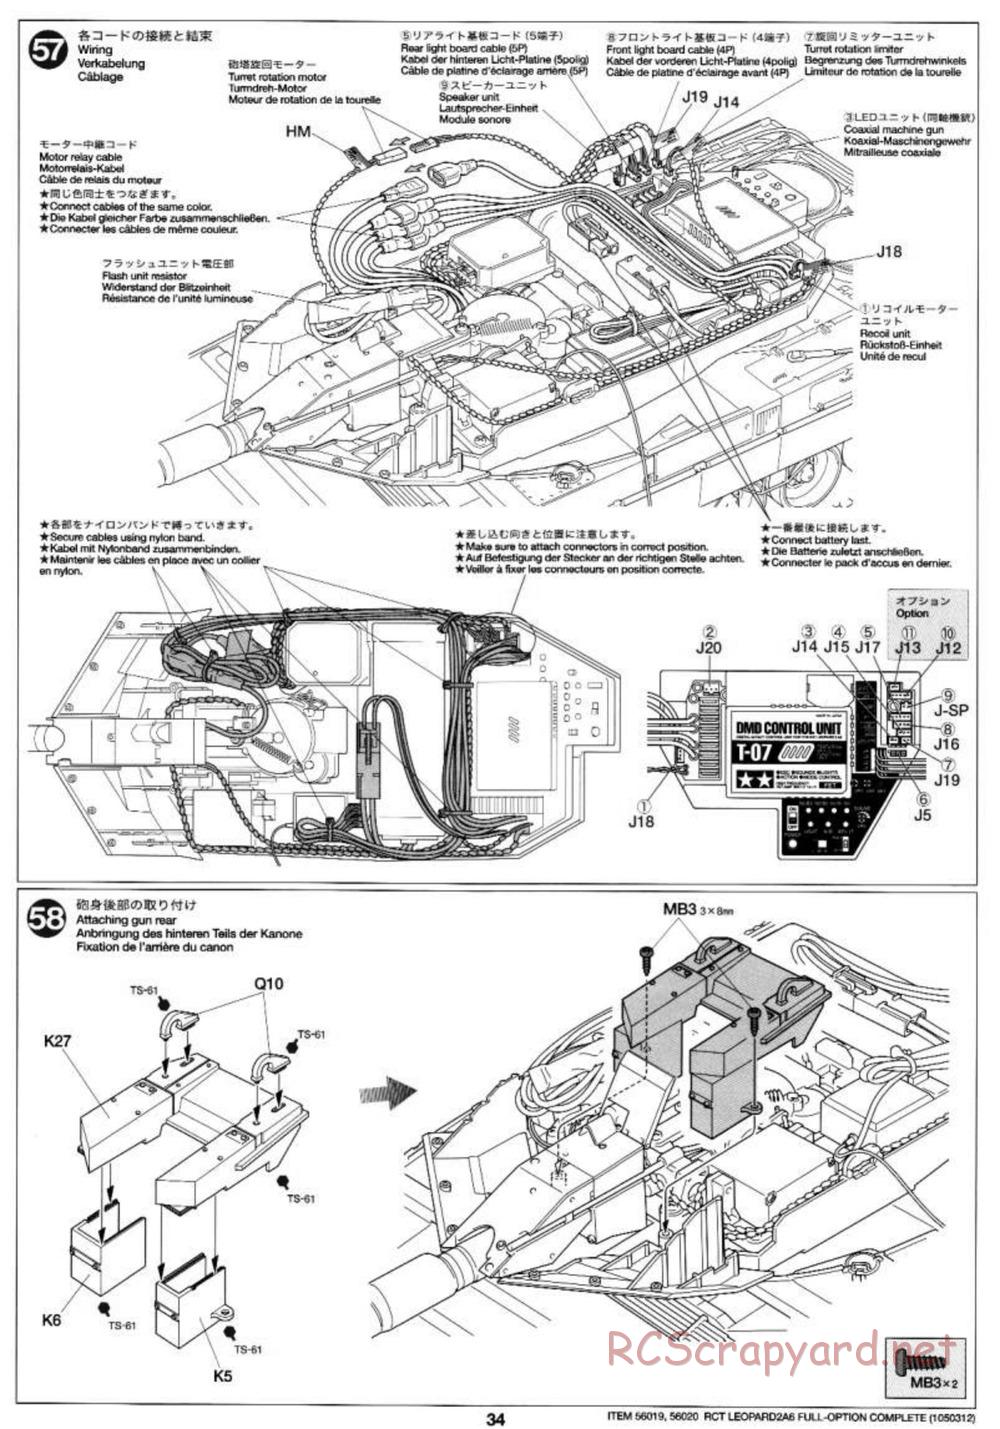 Tamiya - Leopard 2 A6 - 1/16 Scale Chassis - Manual - Page 34